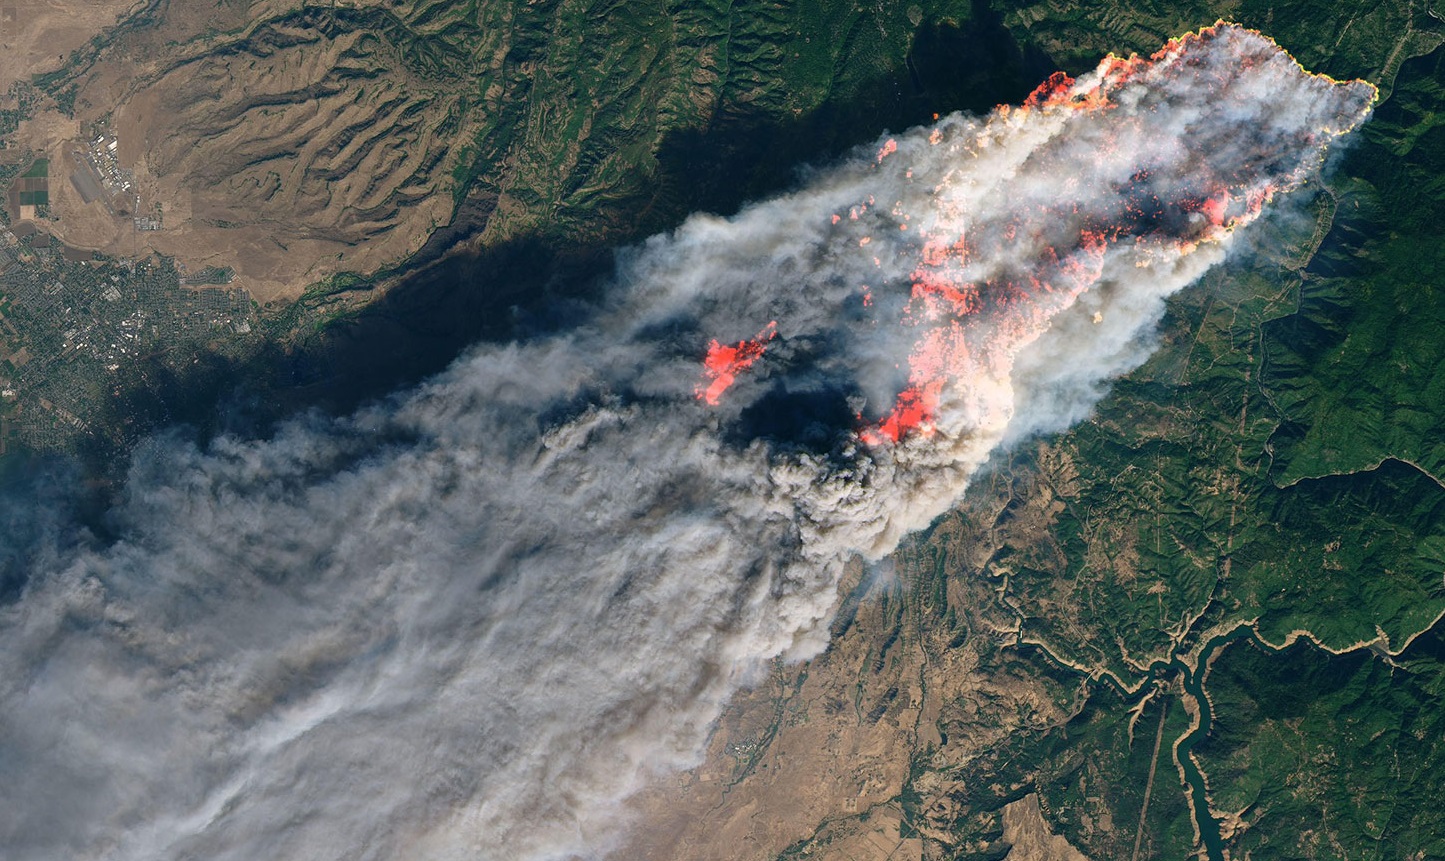 A major new airborne science field campaign begins this month to look at the impacts that smoke from wildfires in the western US